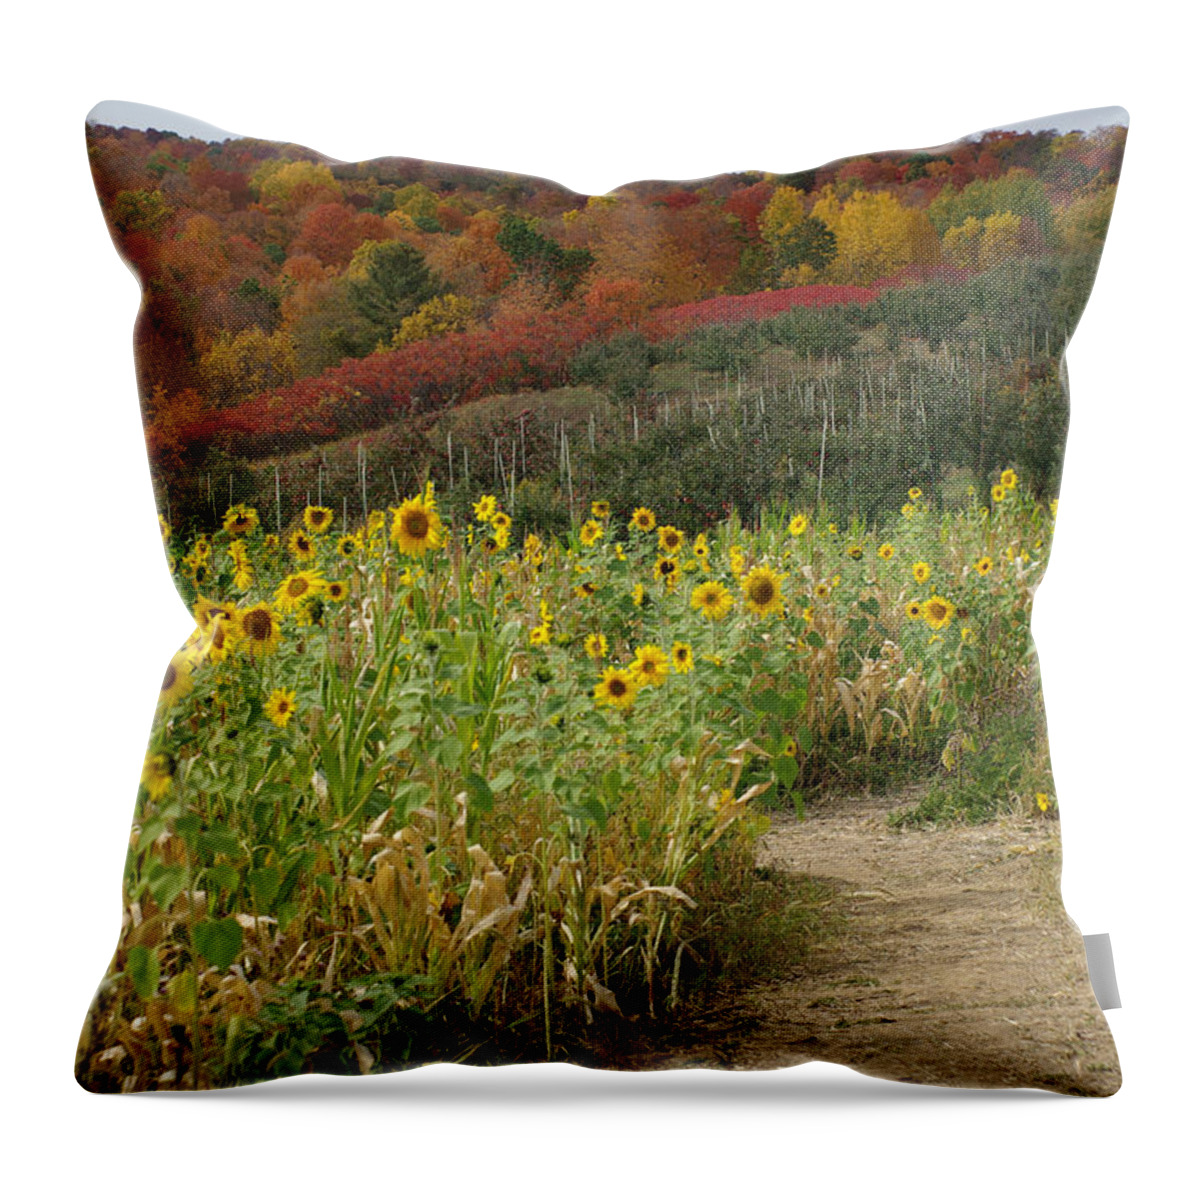 Sunflowers Throw Pillow featuring the photograph Sunshine Valley by Linda Mishler